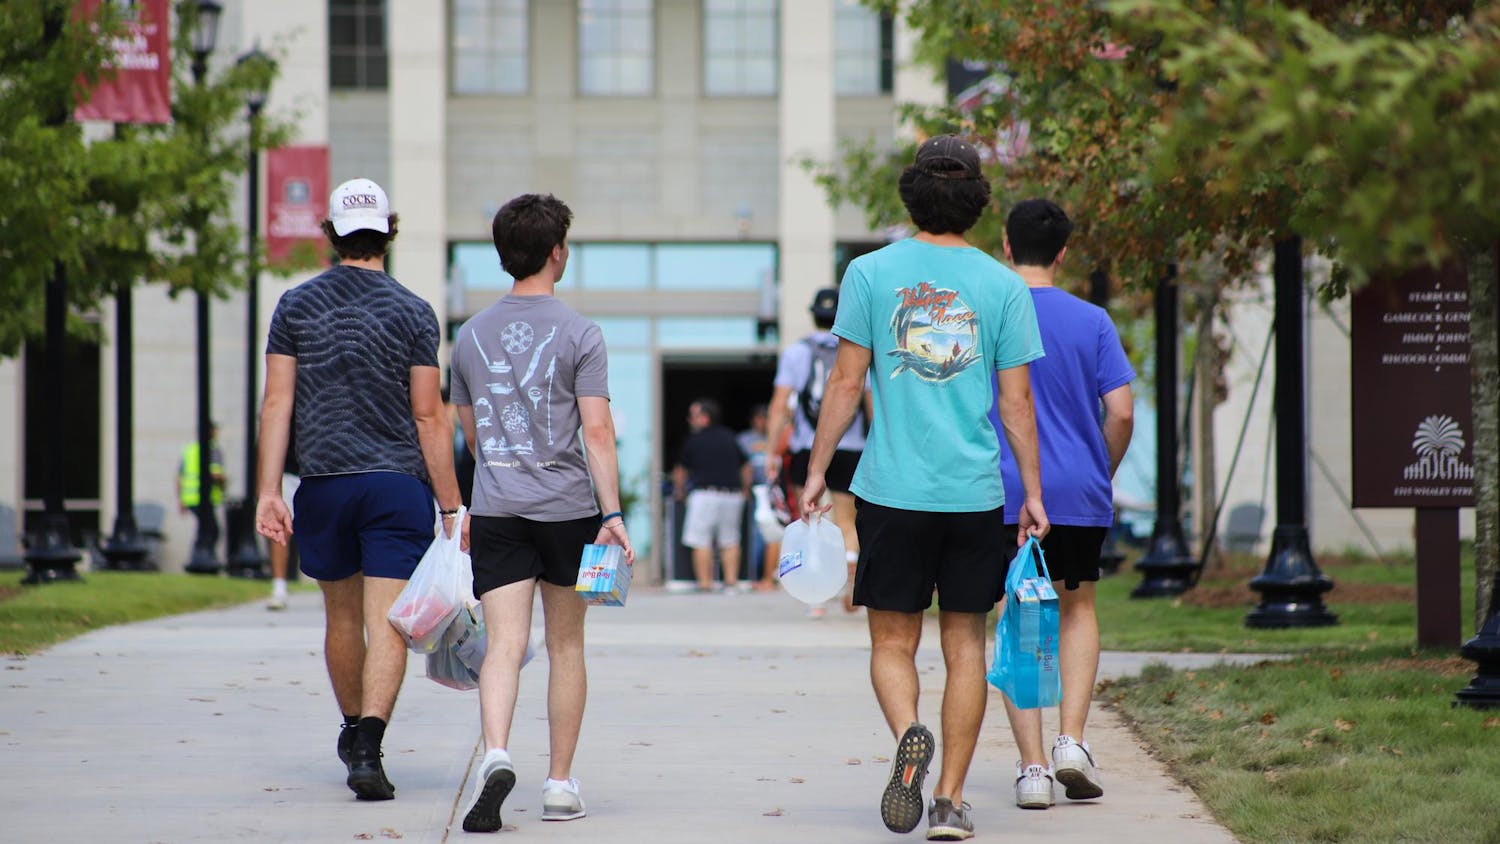 Freshman walking towards Campus Village as they start their journey at the University of South Carolina. Campus Village is made up of four modern buildings housing 1,800 total students, as well as commercial, retail and educational amenities.